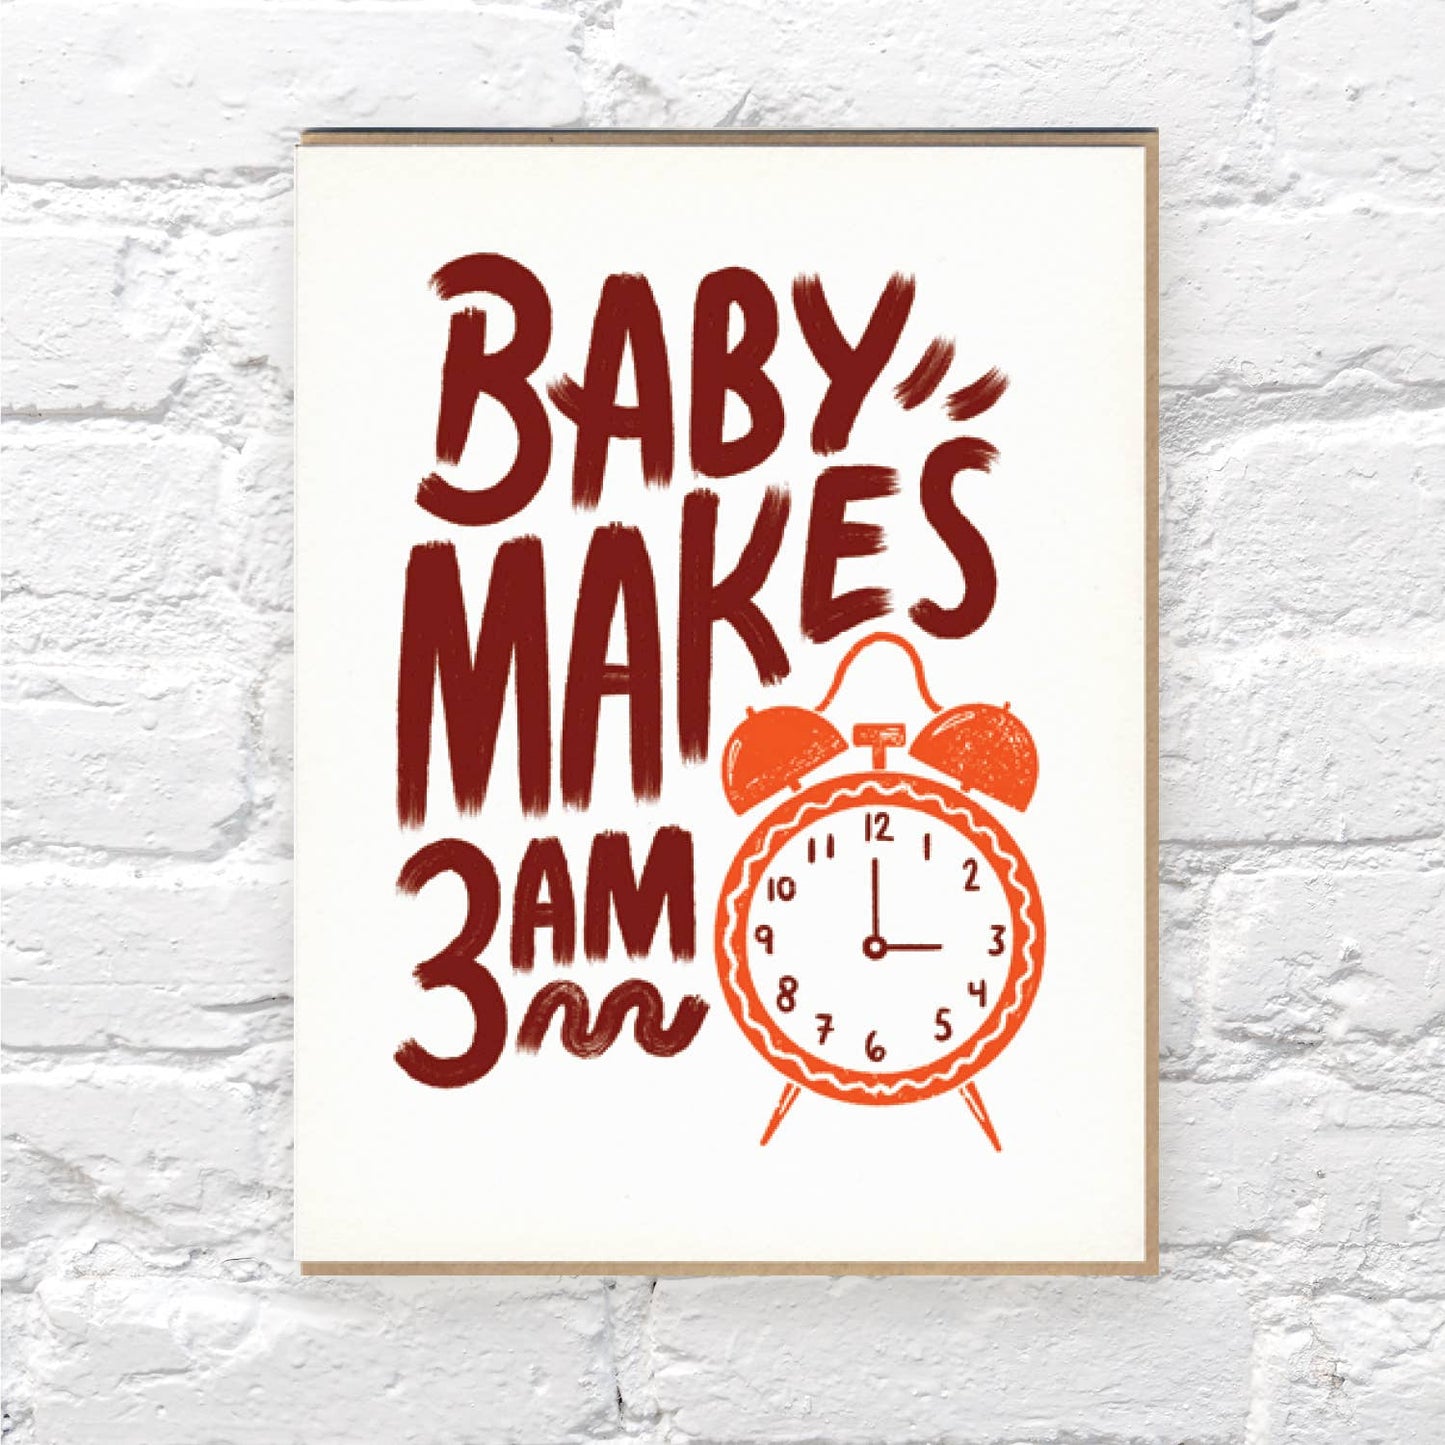 Bench Pressed Baby Makes 3 AM Card